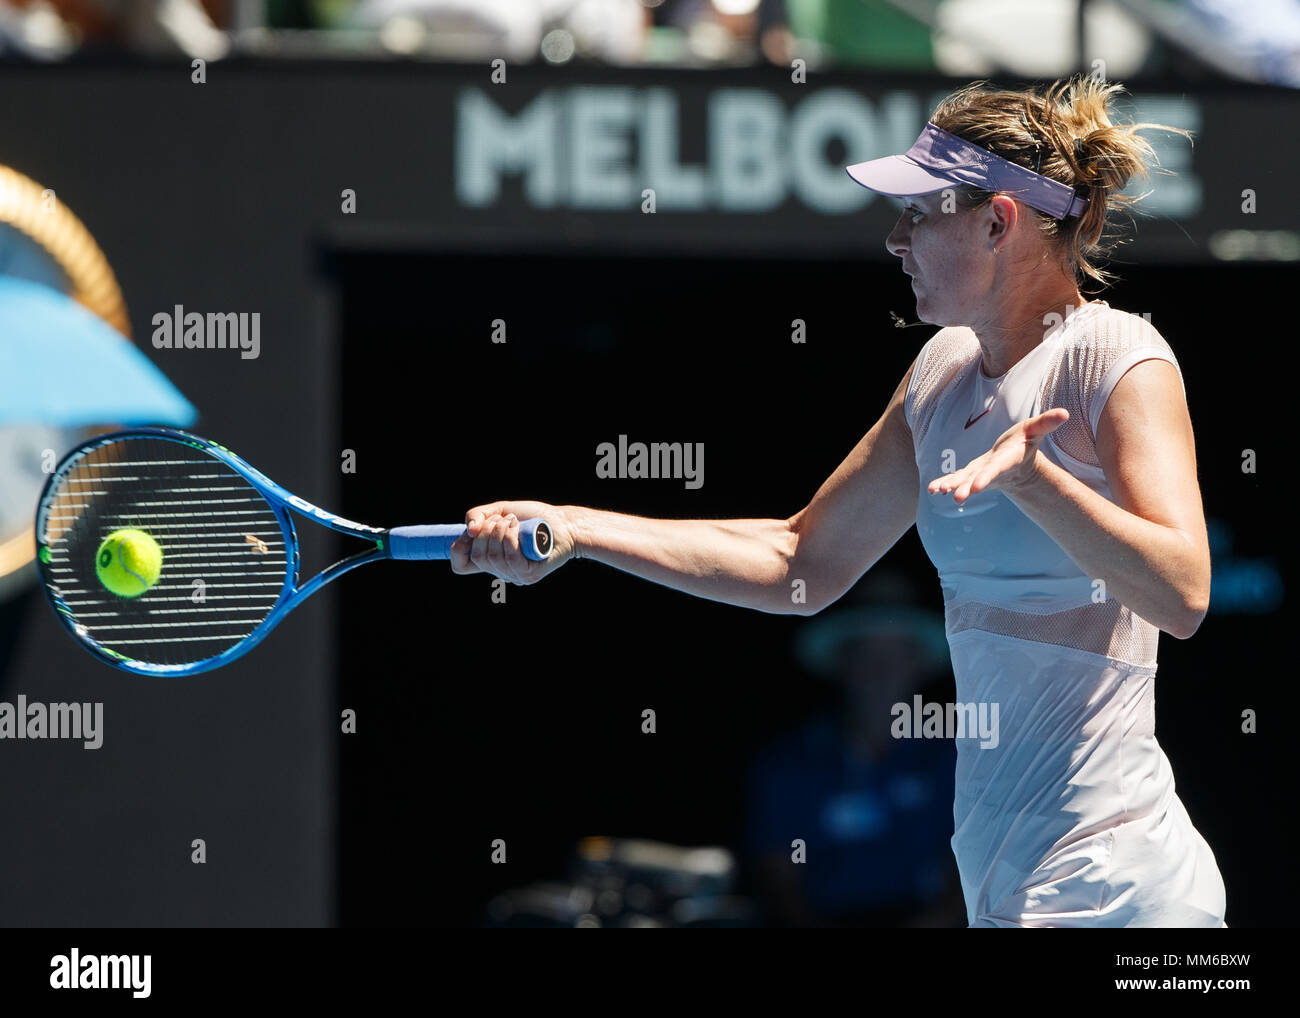 Russian player playing forehand shot in Australian Open 2018 Tournament, Melbourne Park, Melbourne, Victoria, Australia Stock Photo - Alamy